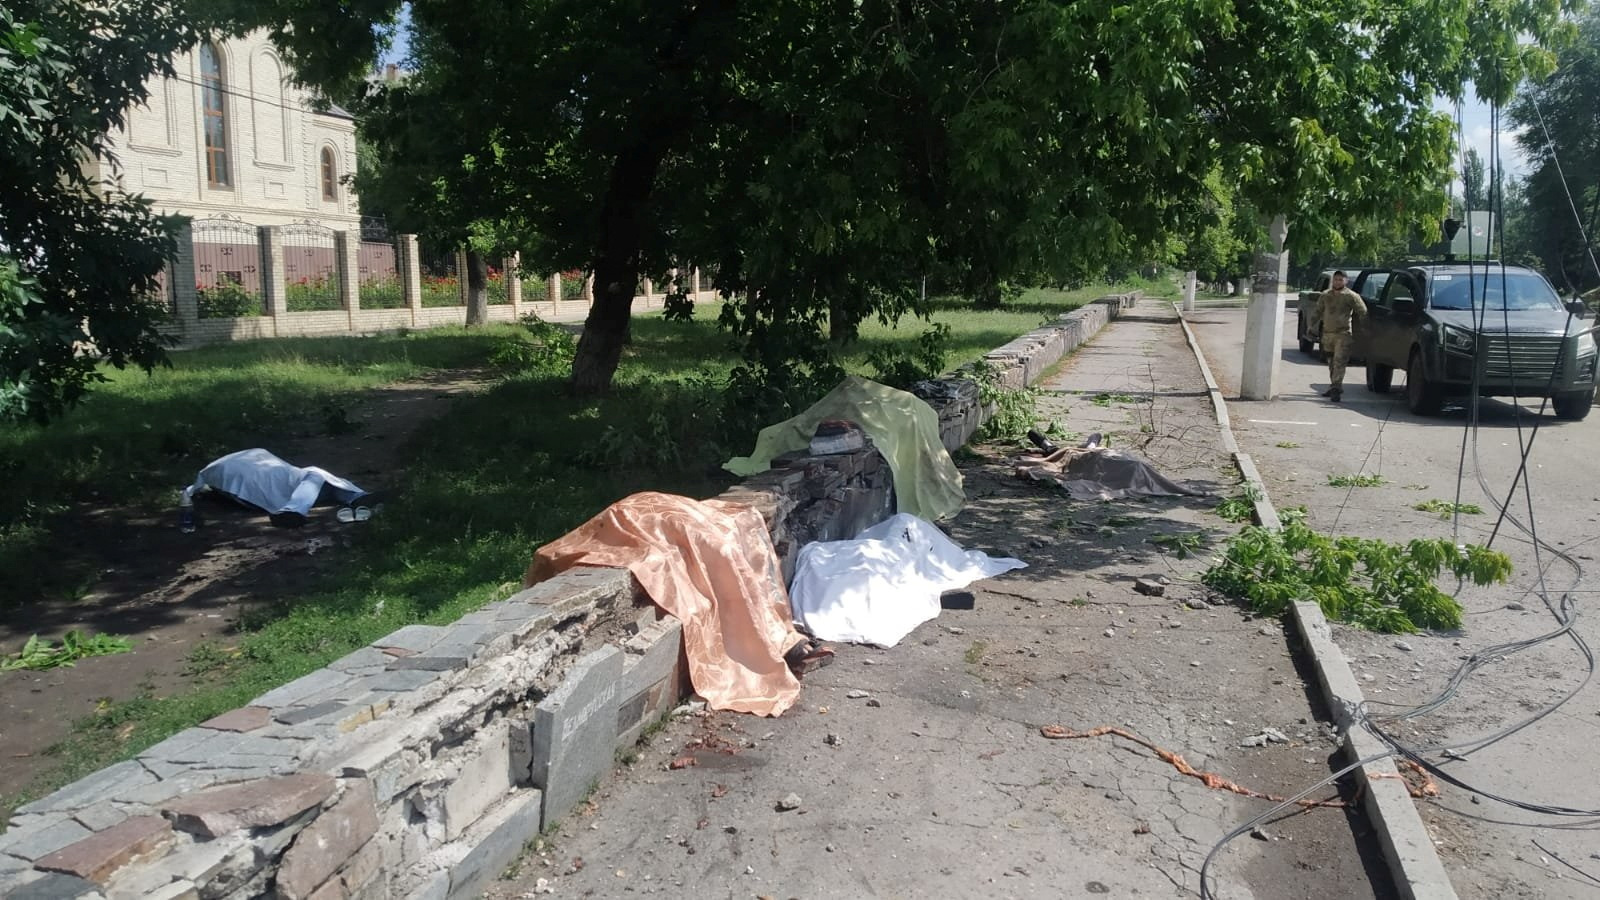 Bodies of people killed in the town of Toretsk in the Donetsk region, Ukraine, on August 4.